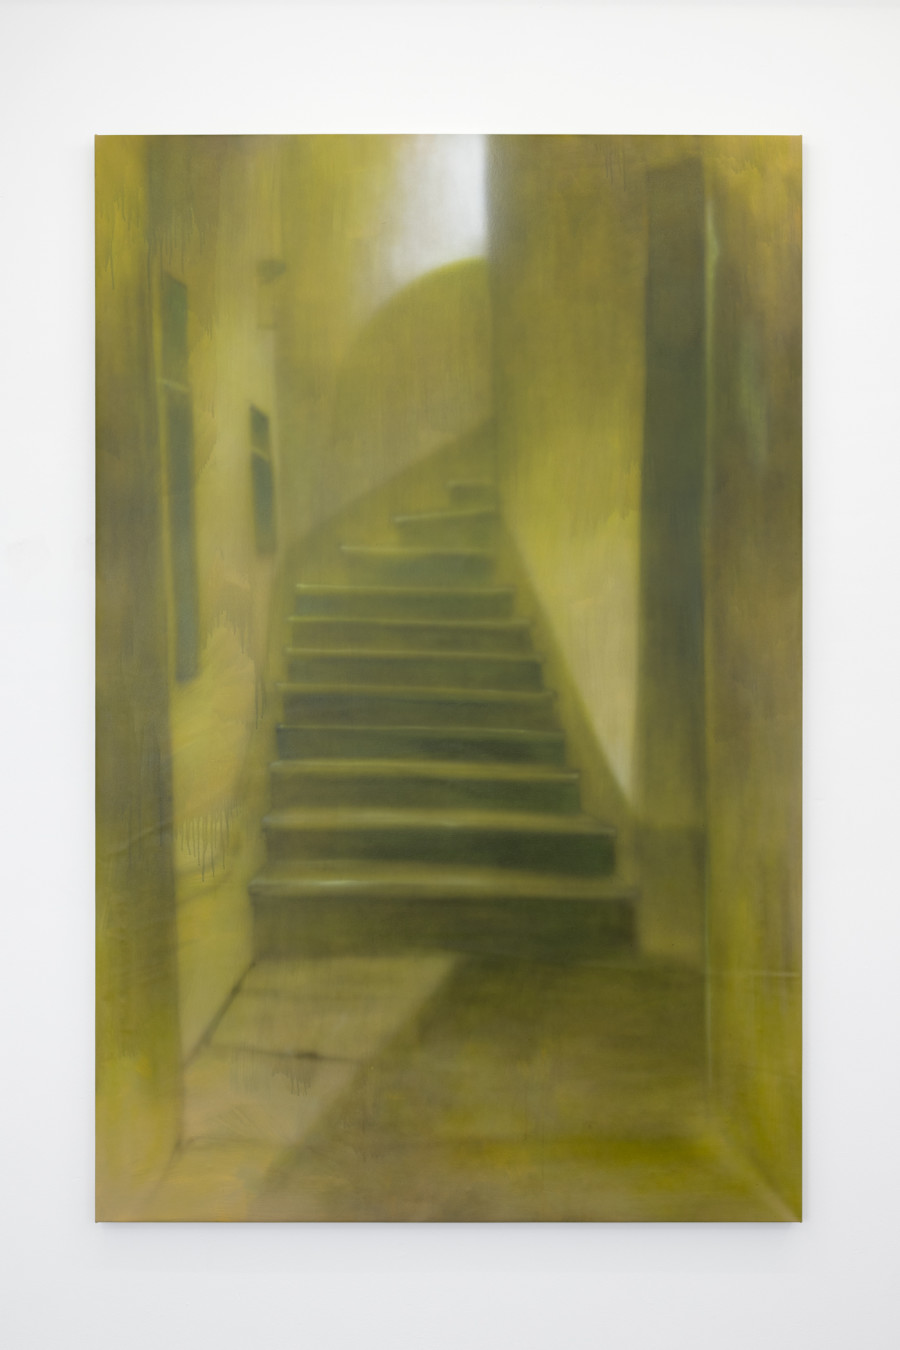 Will Sheldon, Untitled (Yellow), 2022, Airbrushed acrylic on canvas, 216 × 140 cm. Courtesy: Weiss Falk and the Artist. Photo: Gina Folly